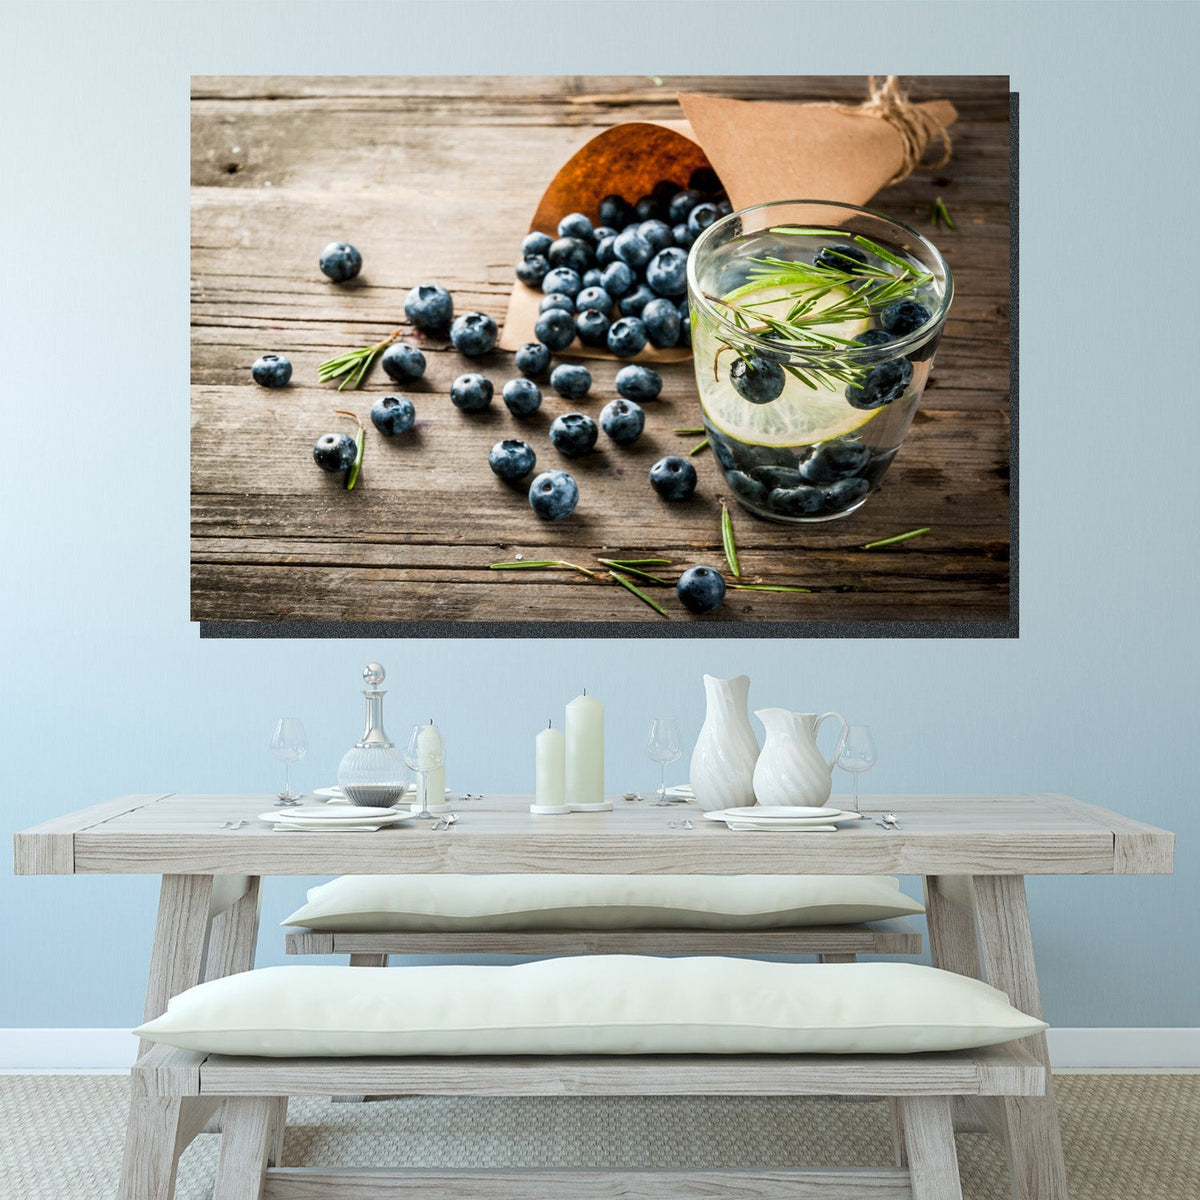 https://cdn.shopify.com/s/files/1/0387/9986/8044/products/BerryWaterCanvasArtprintStretched-2.jpg